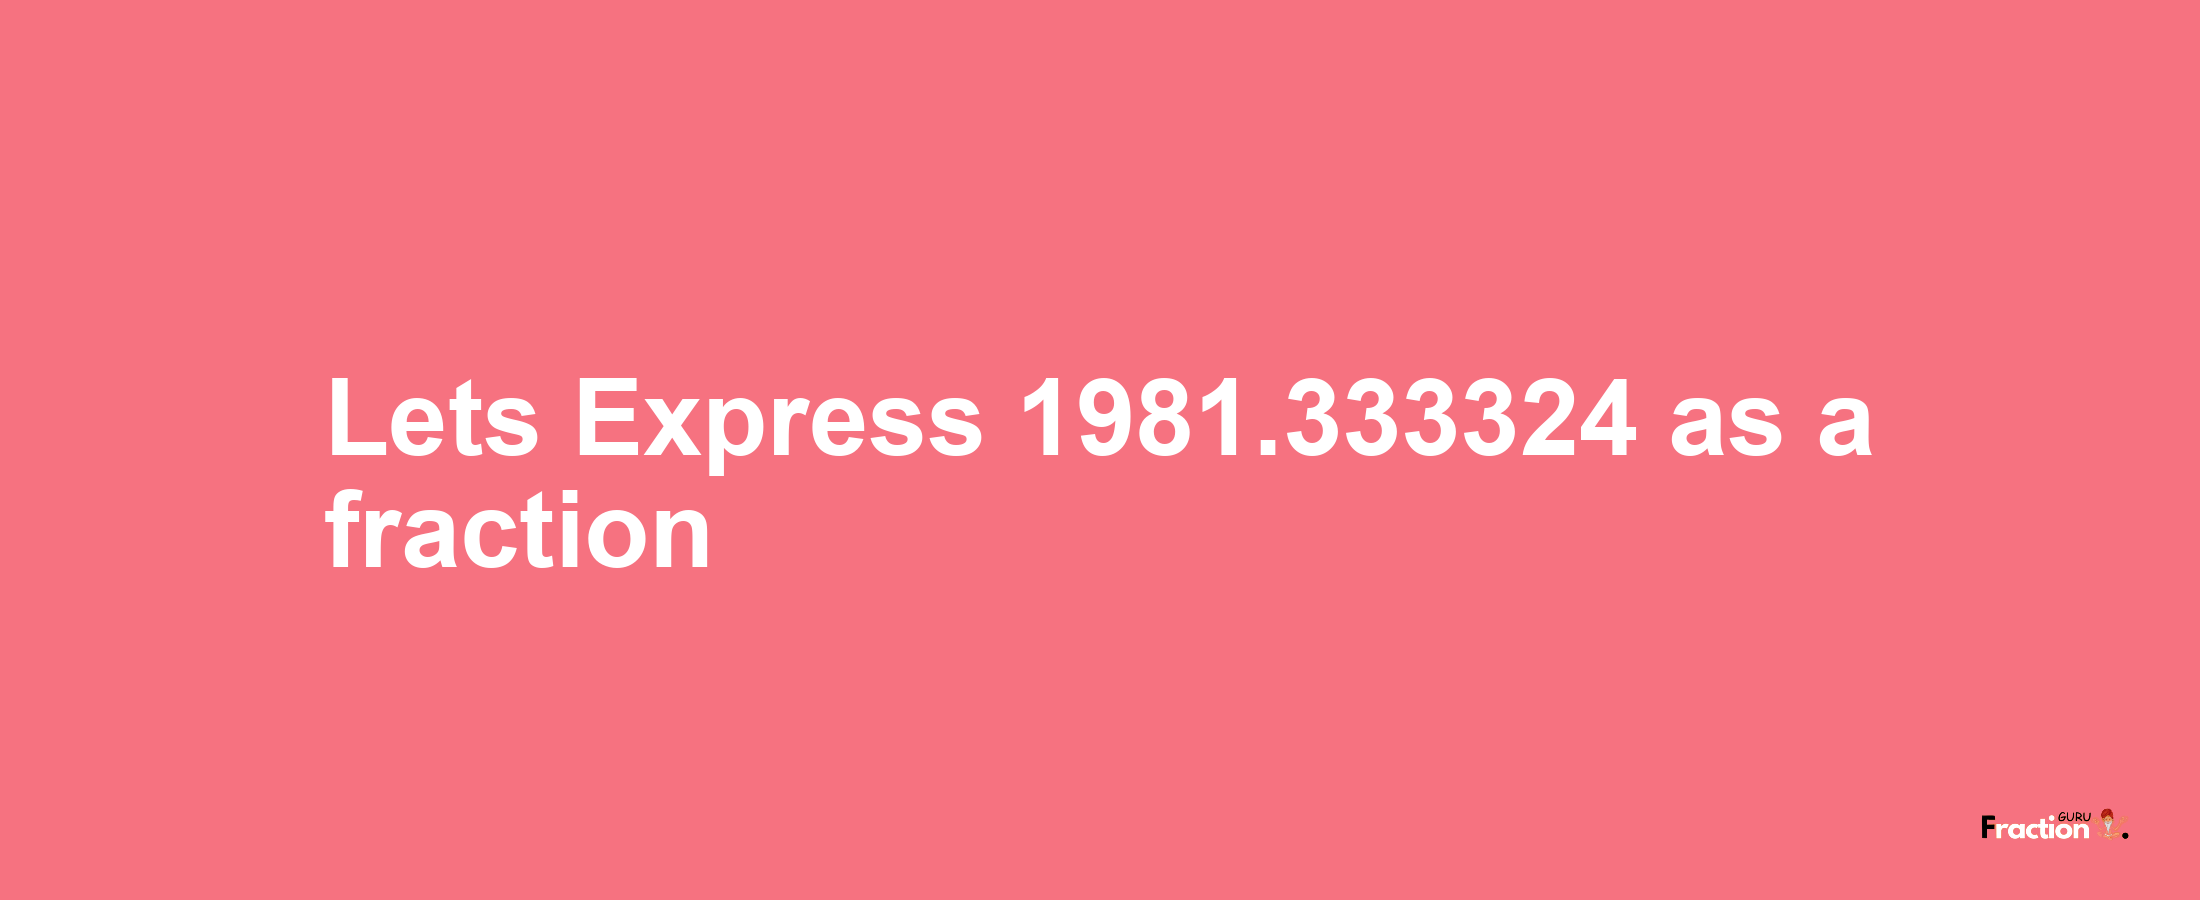 Lets Express 1981.333324 as afraction